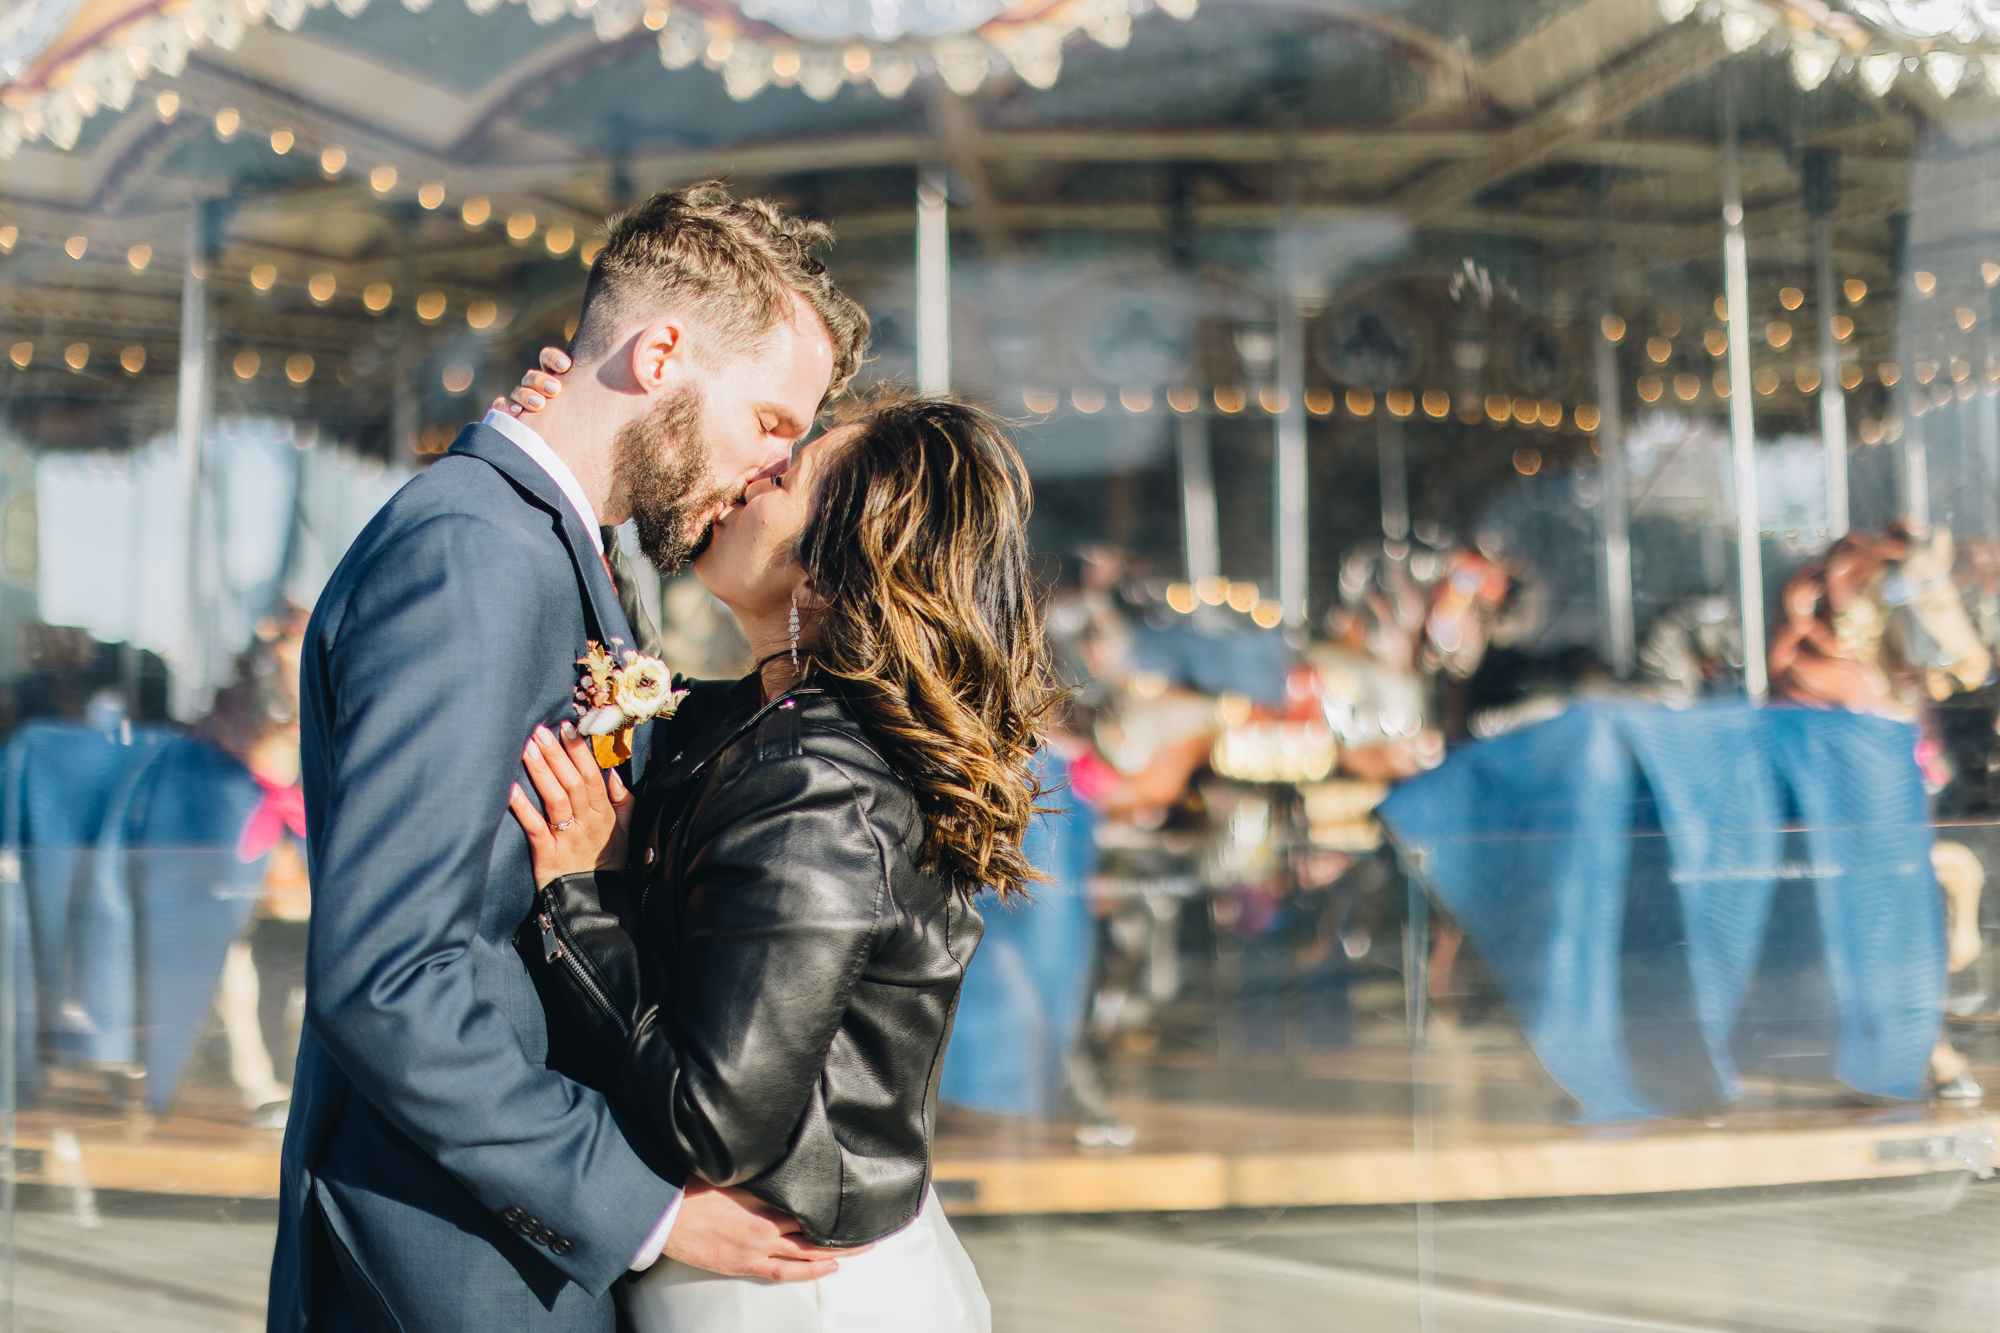 Fun Fall DUMBO Elopement with New York views and foliage